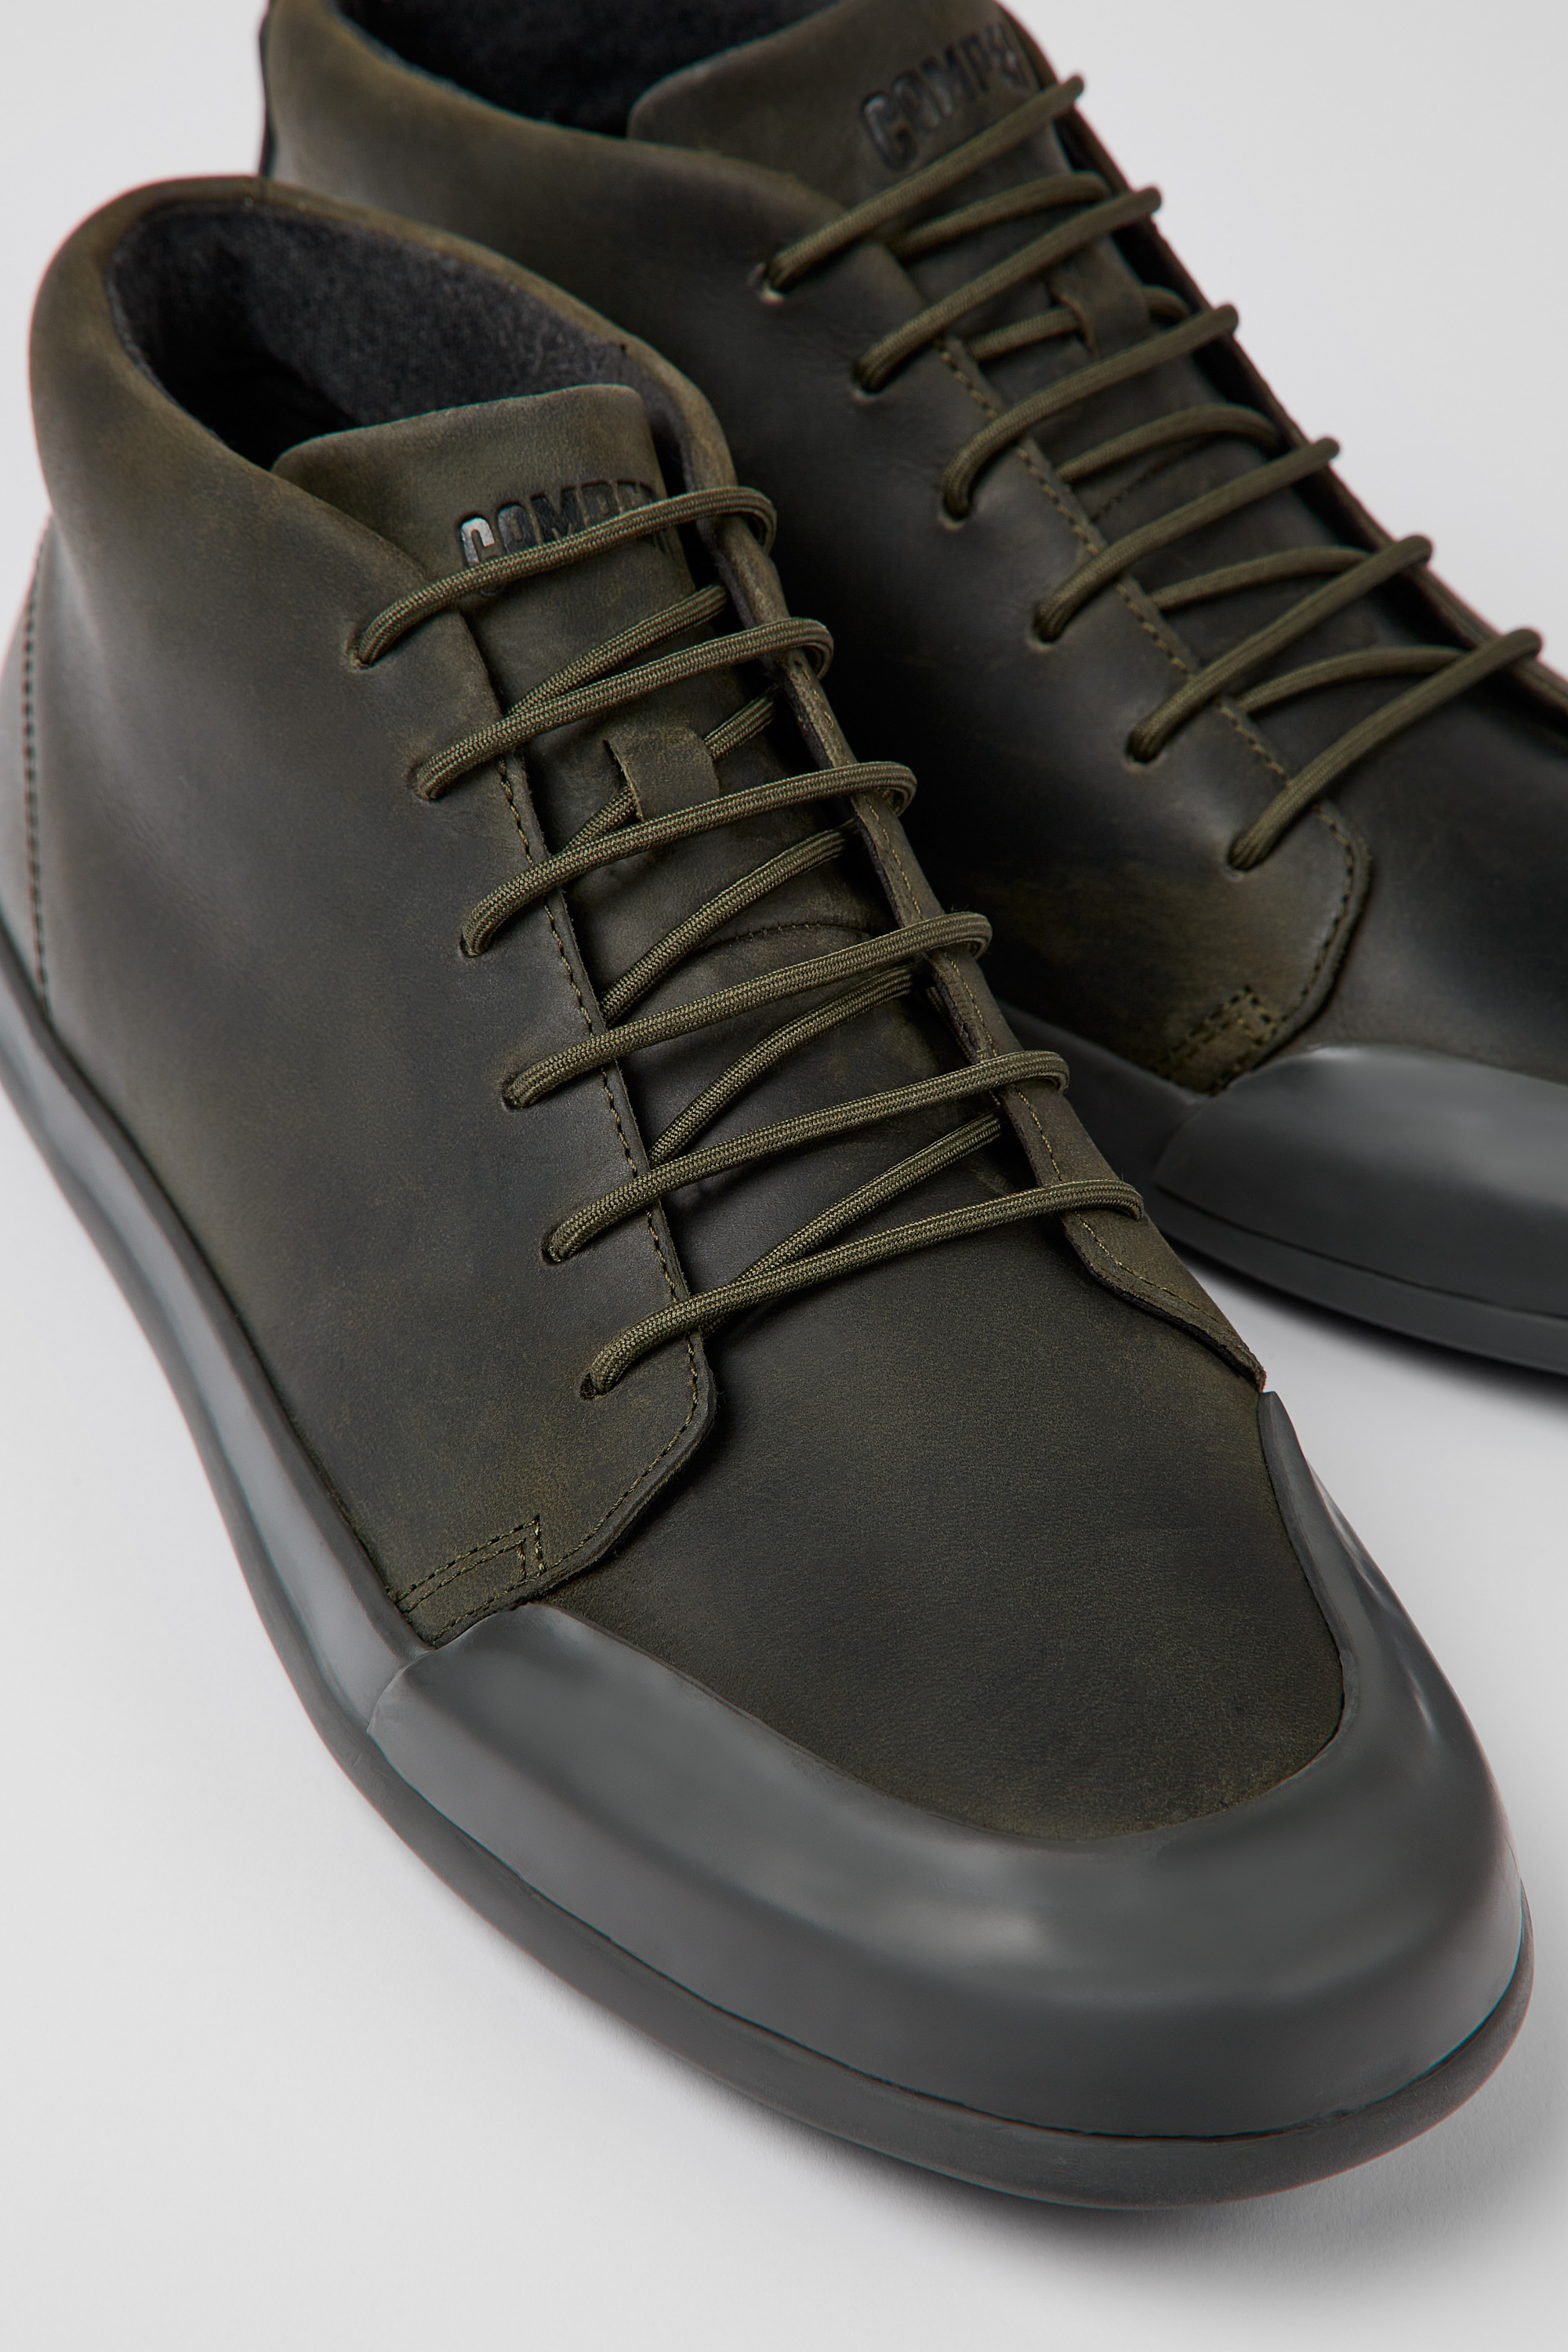 Peu Green Ankle Boots for Men - Fall/Winter collection - Camper Austria